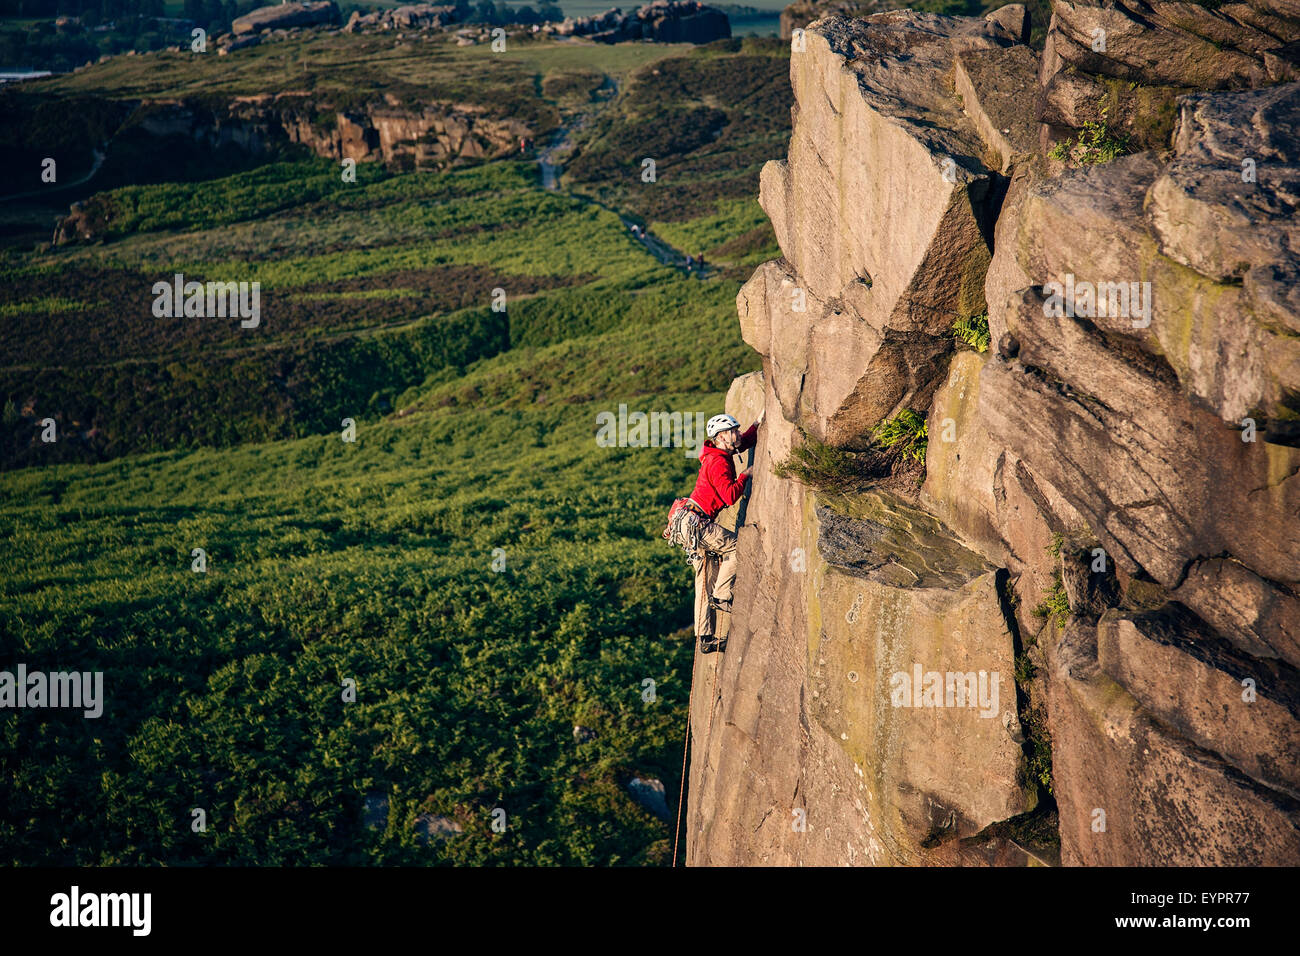 A climber climbing up ilkley Crags on Ilkley moor Stock Photo